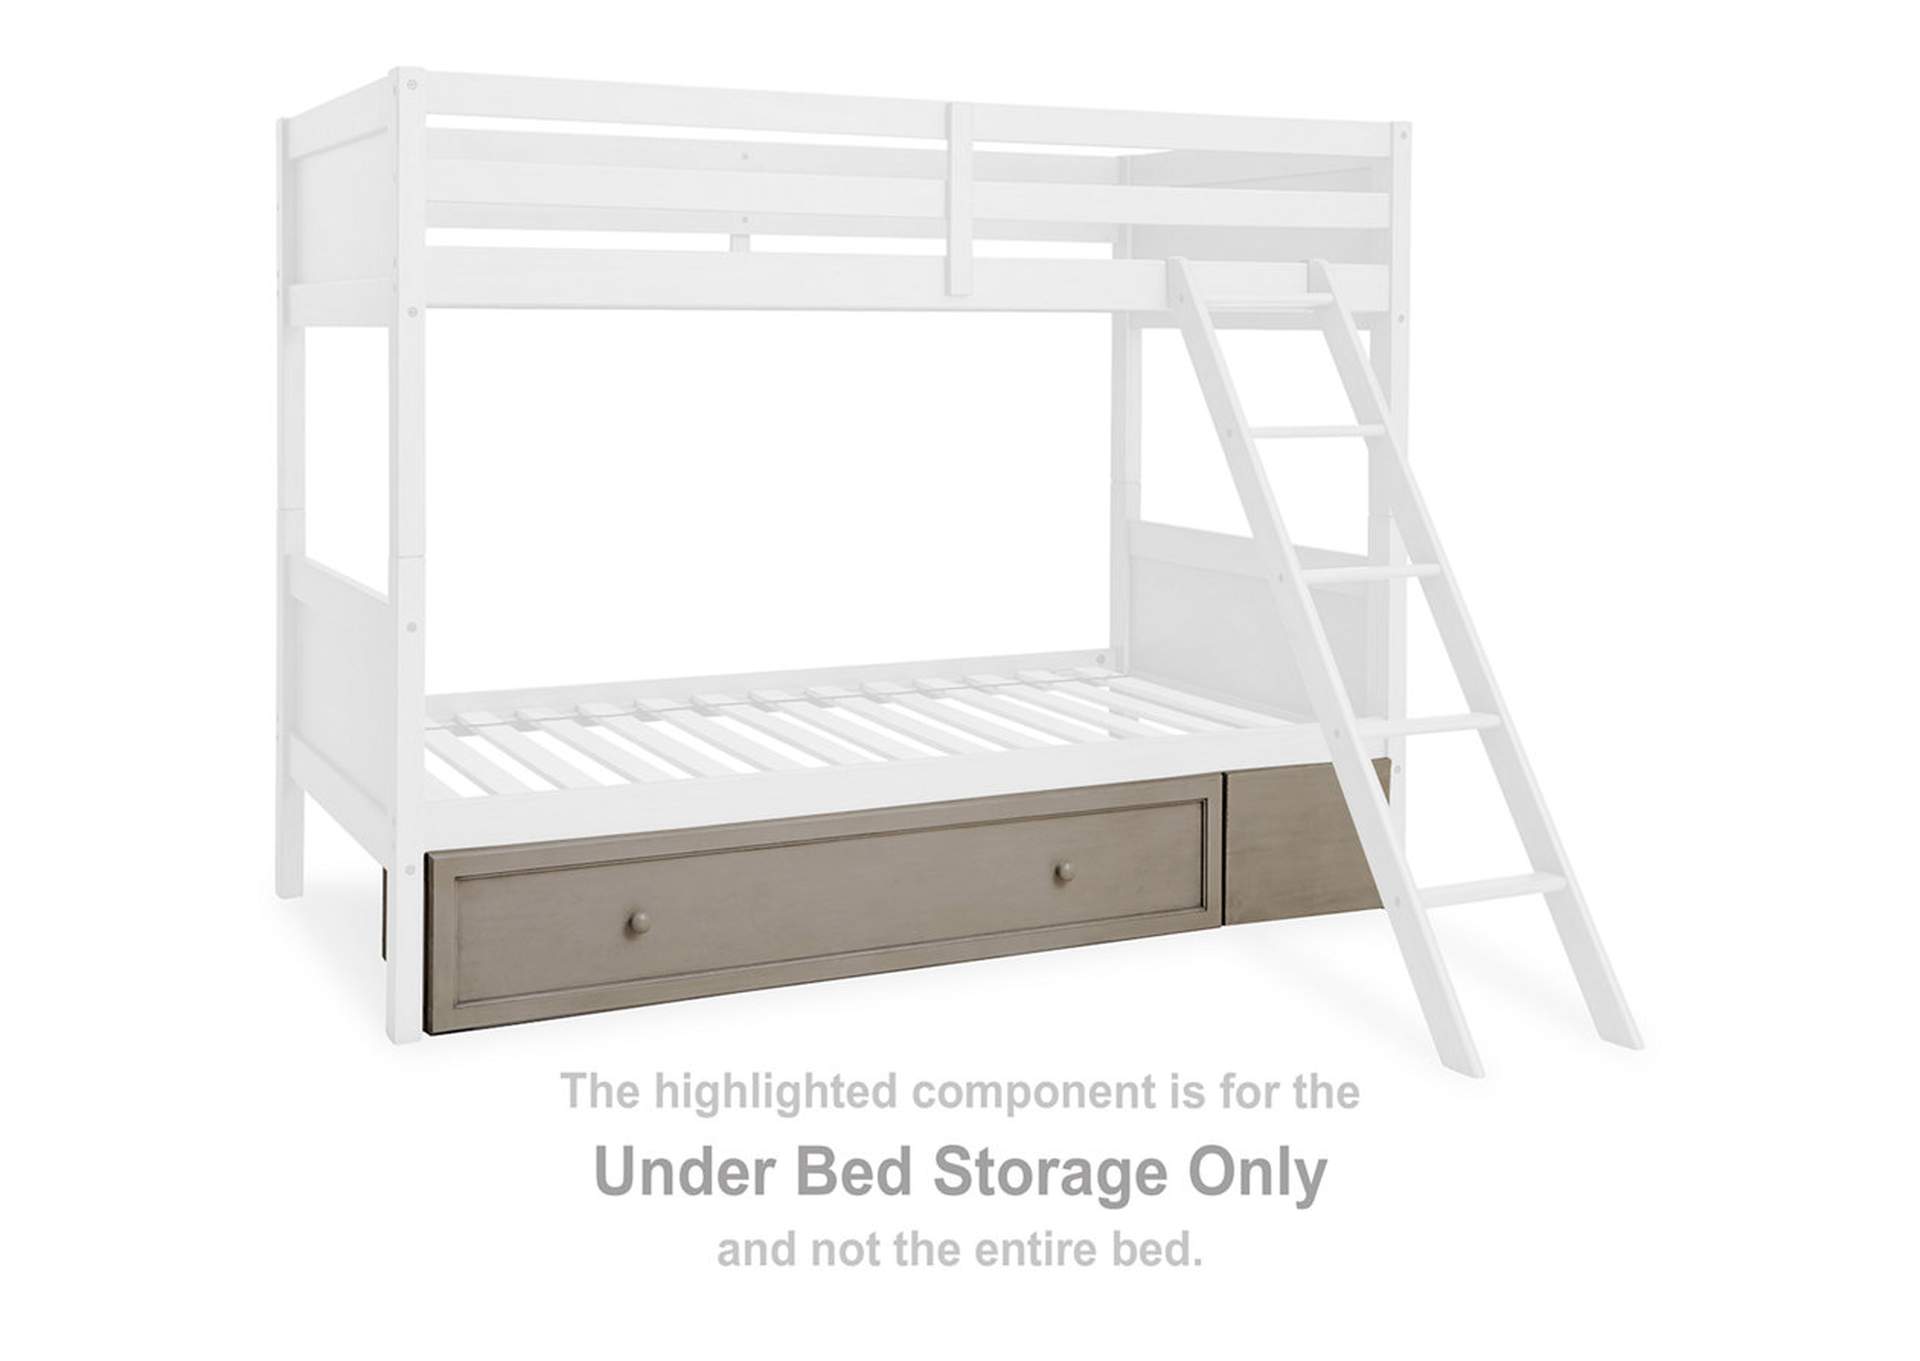 Lettner Twin over Full Bunk Bed and Dresser,Signature Design By Ashley